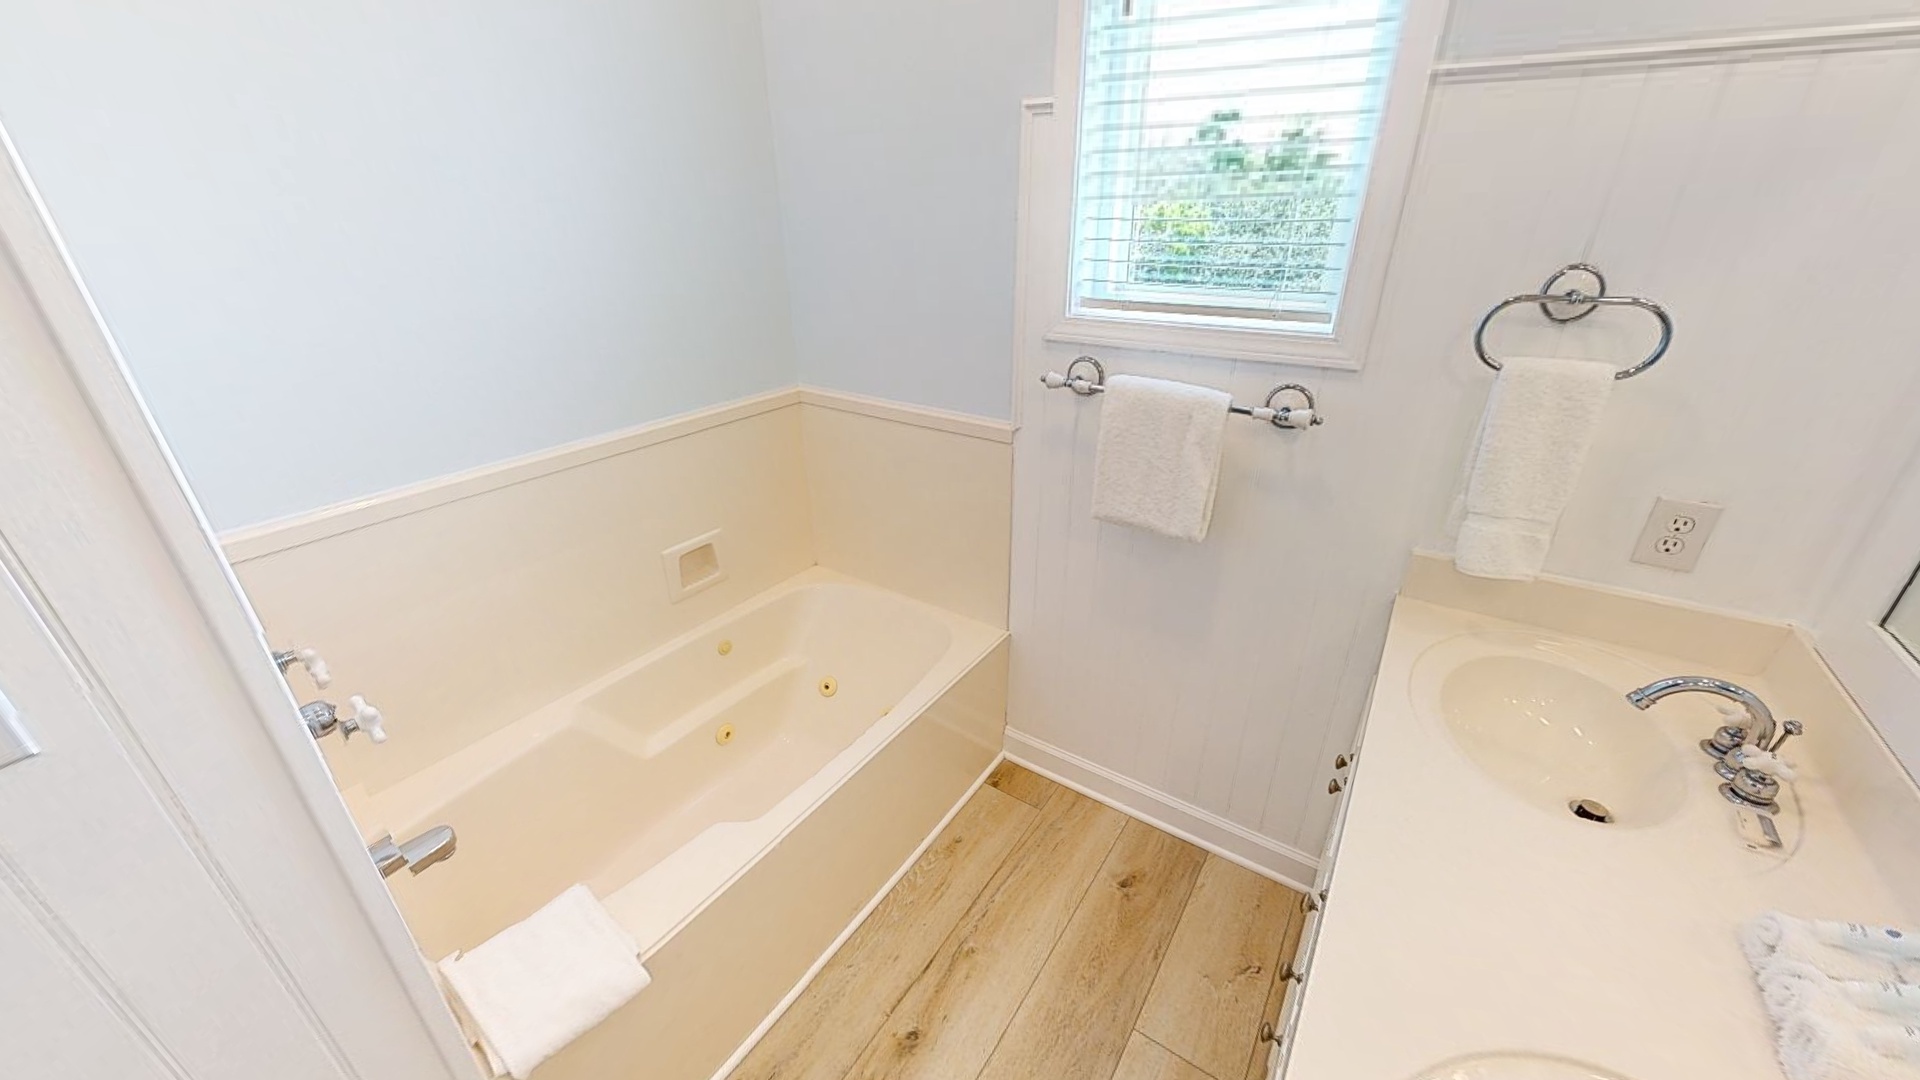 Jetted tub in the 2nd floor bathroom